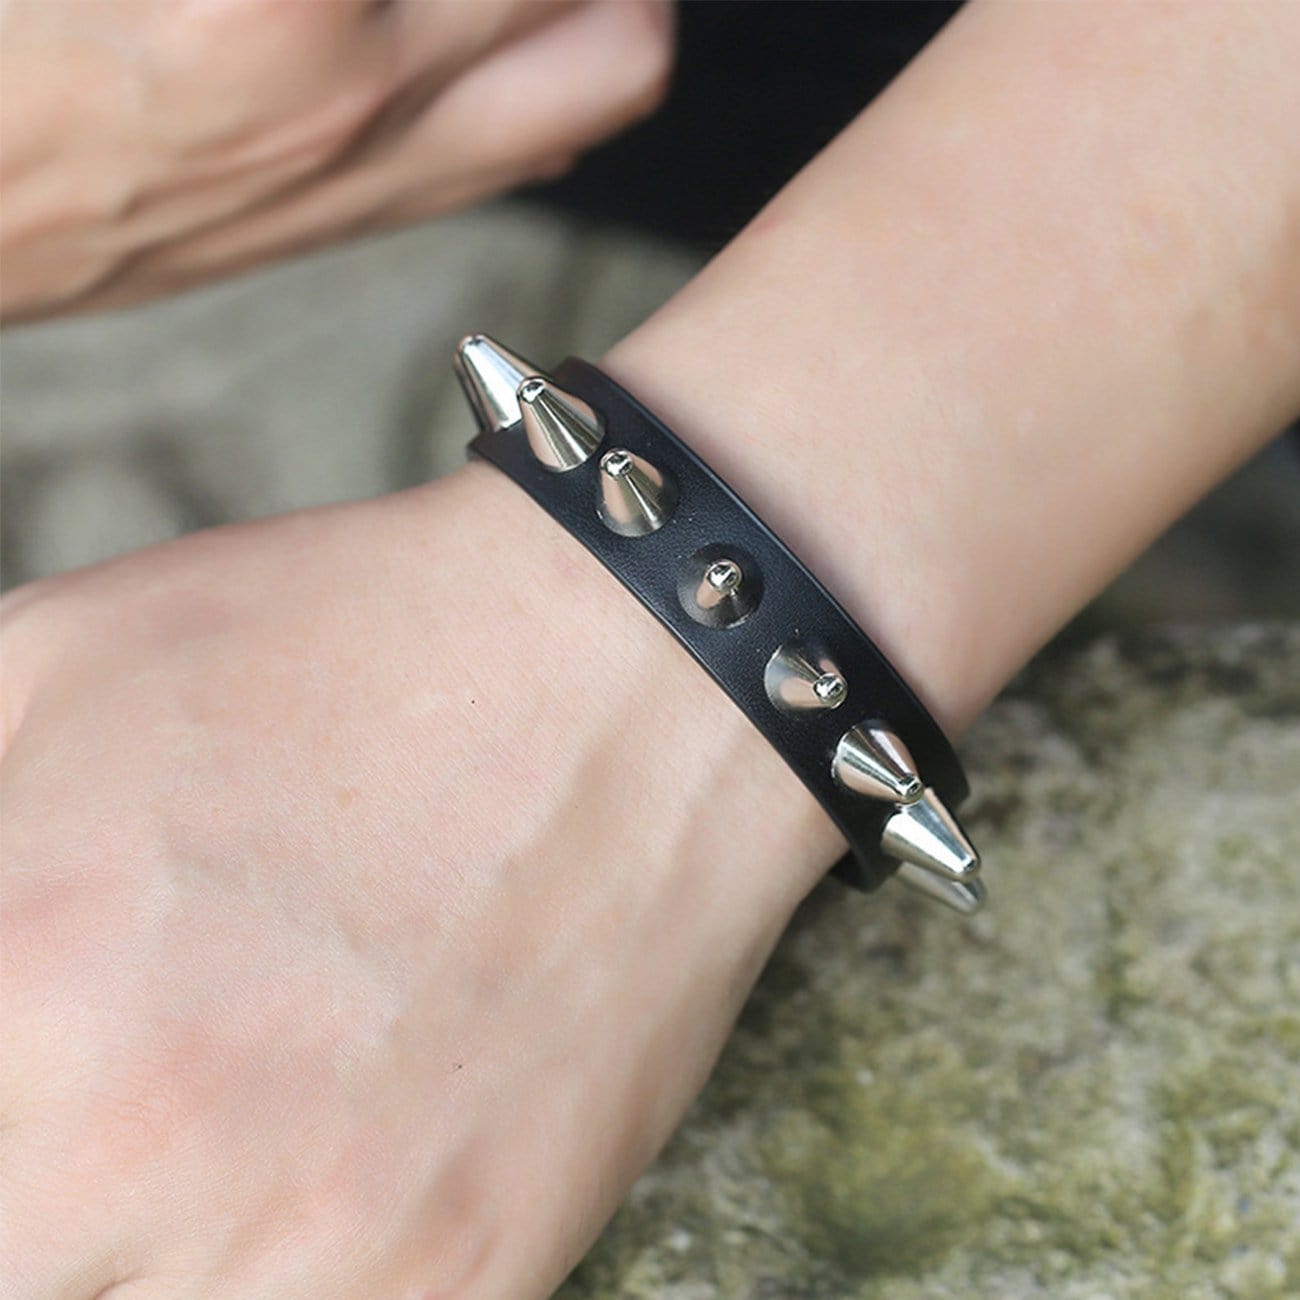 TO Punk Personality Spiked  Leather Bracelet